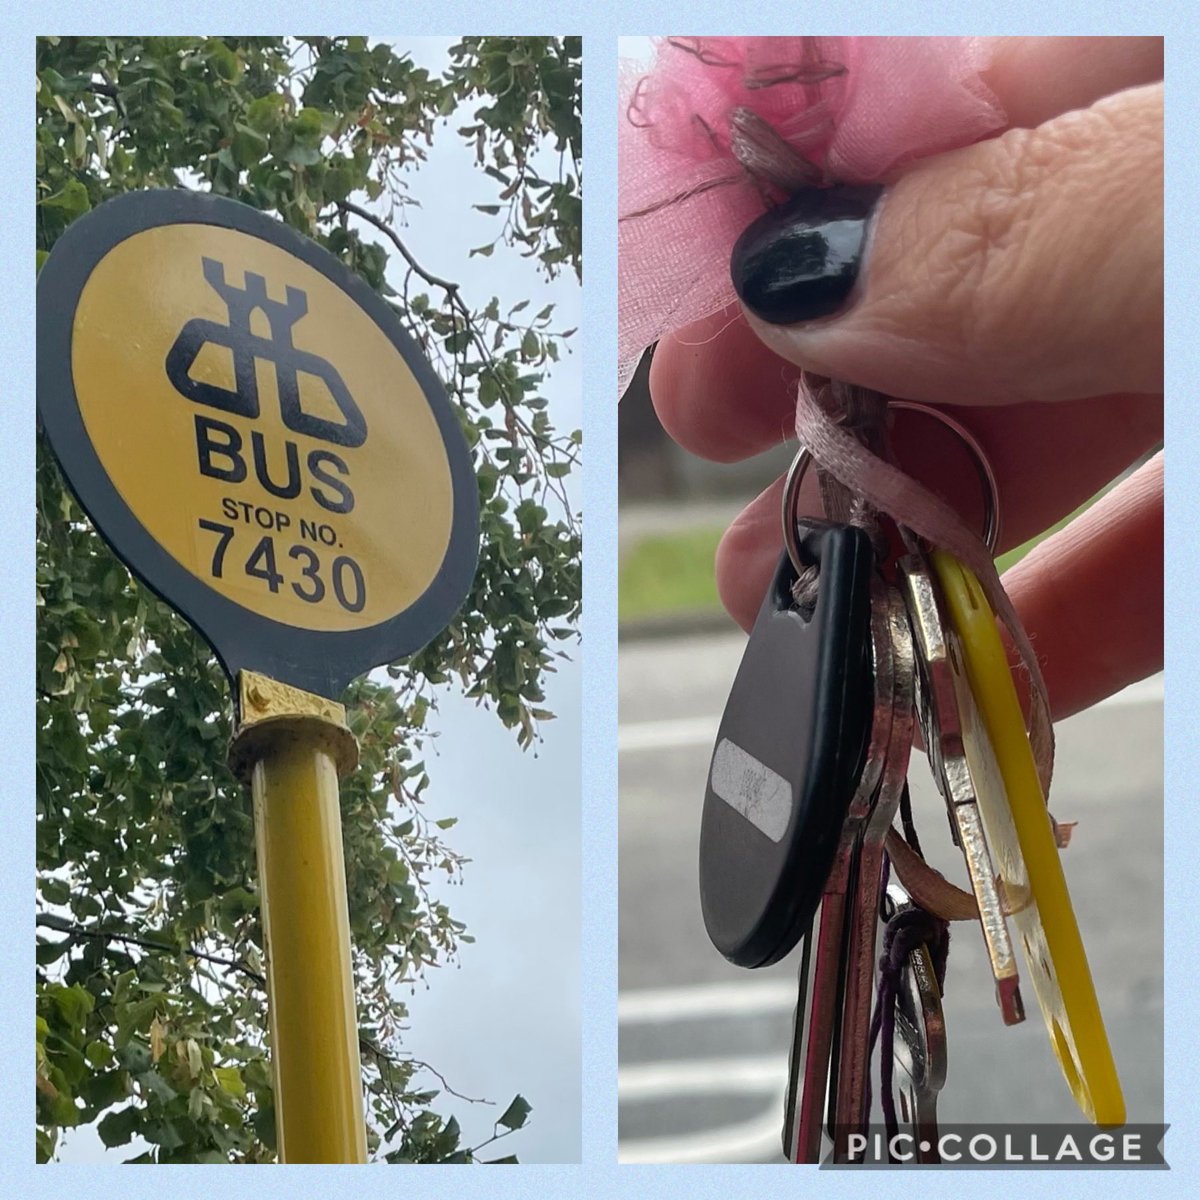 ⁦@dublinbusnews⁩ keys found at this bus stop on Griffith Ave #lostandfound #keys #dublin11